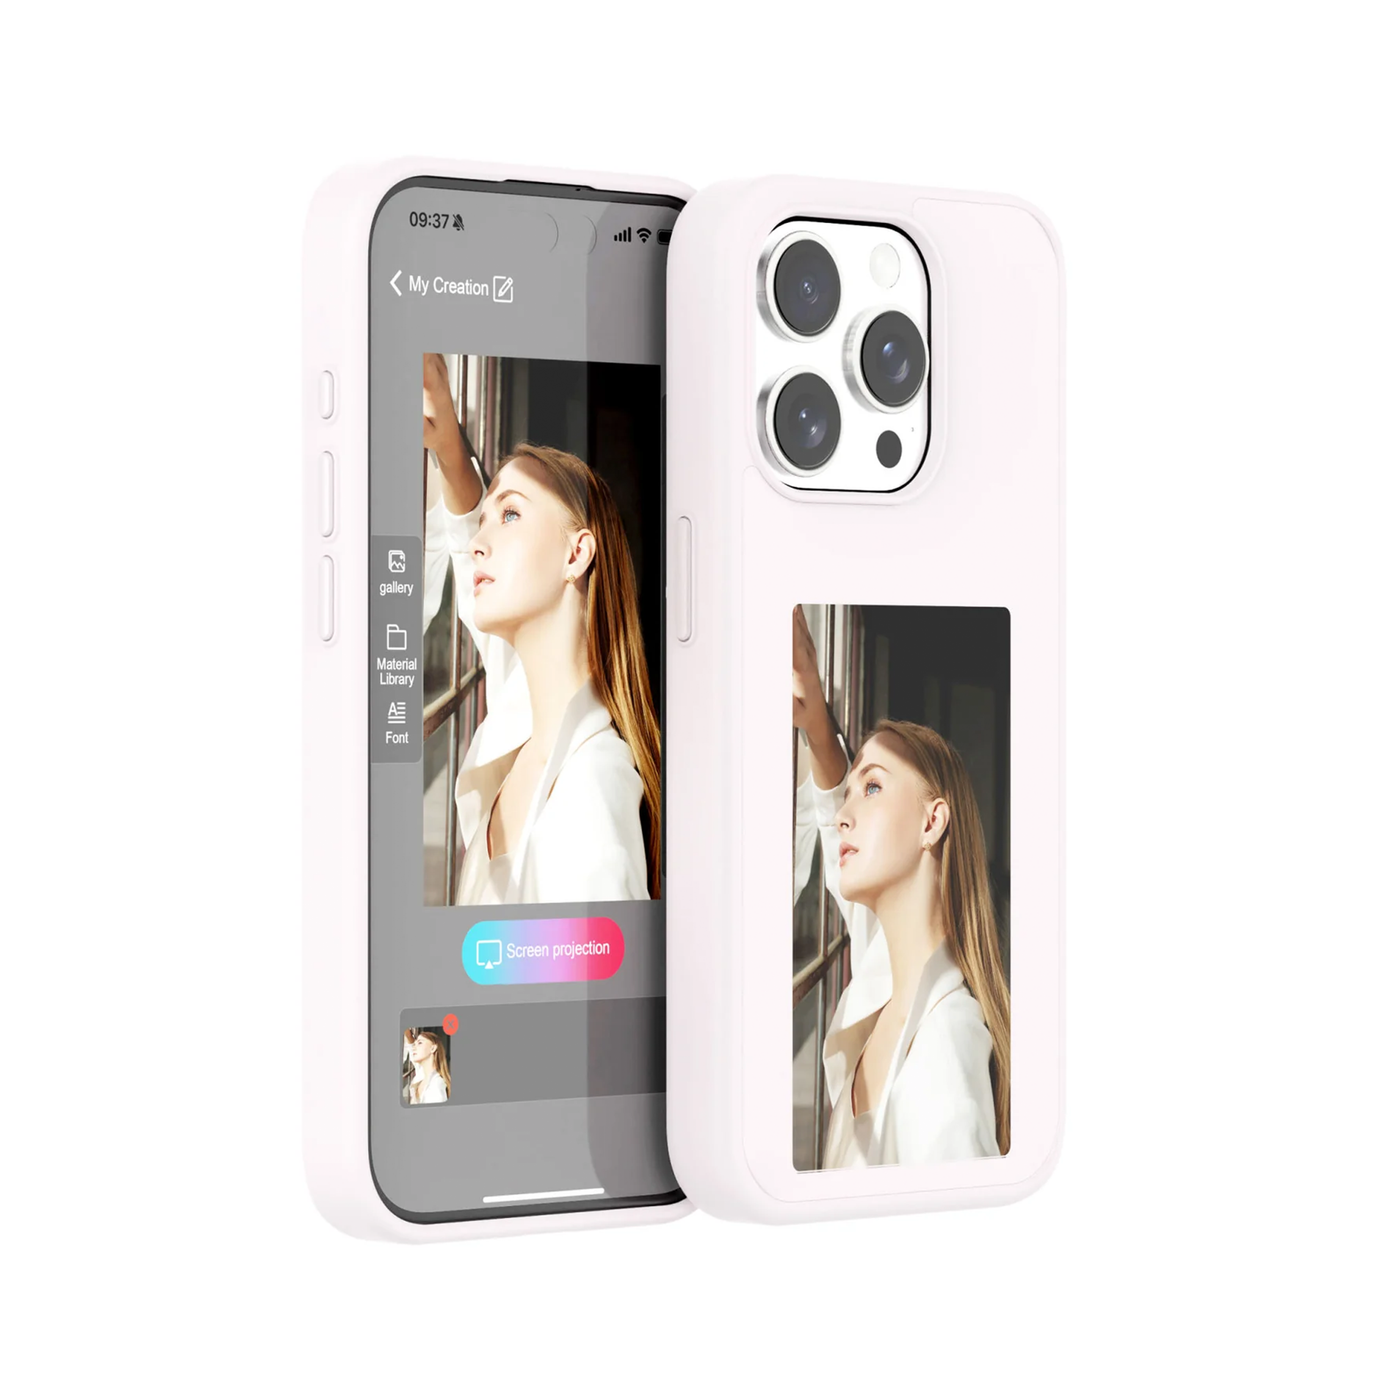 Pixe™ Smart Ink-Screen Case for iPhone